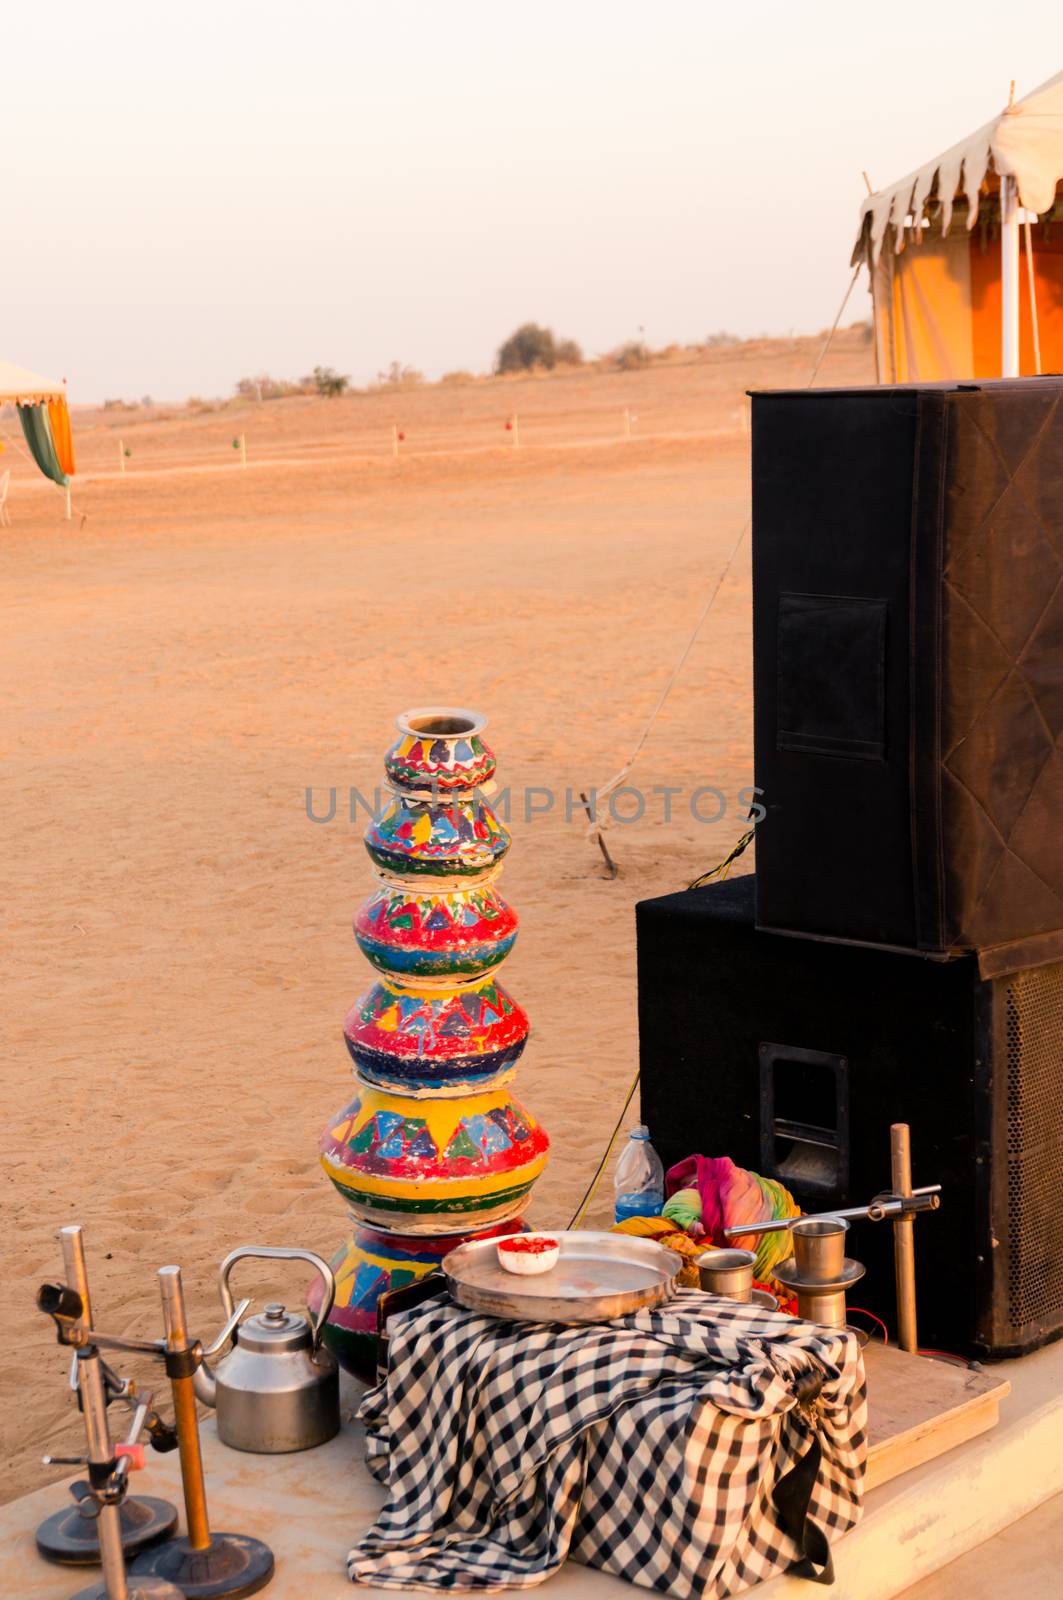 Evening shot showing the props like clayware pots, clay pots, dishes, kettle, mics and more as props for traditional rajasthani dances for visitor entertainment at a desert camp. Shows the colorful traditions of rajasthan the biggest state of India